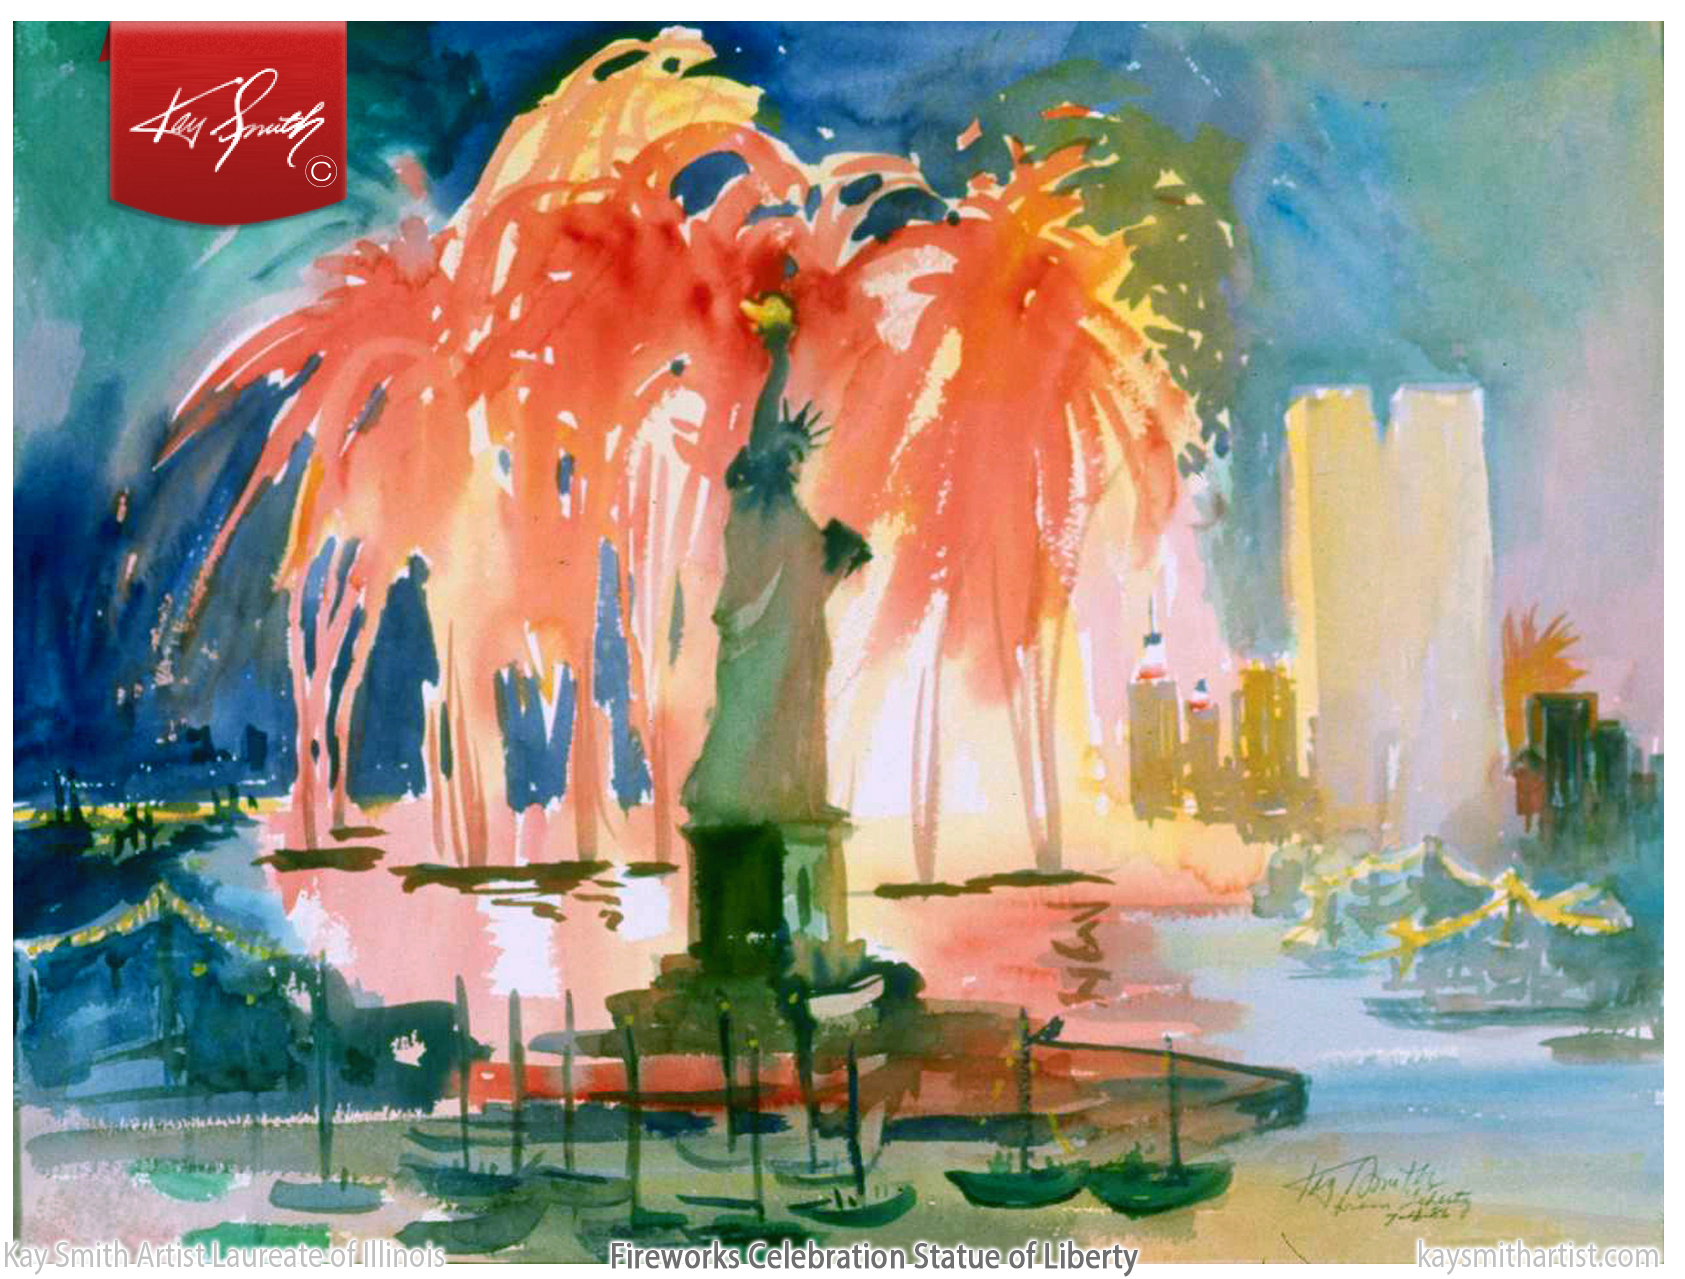 Kay-Smith-Artist-Laureate-of-IL Fireworks-Celebration-Statue-of-Liberty